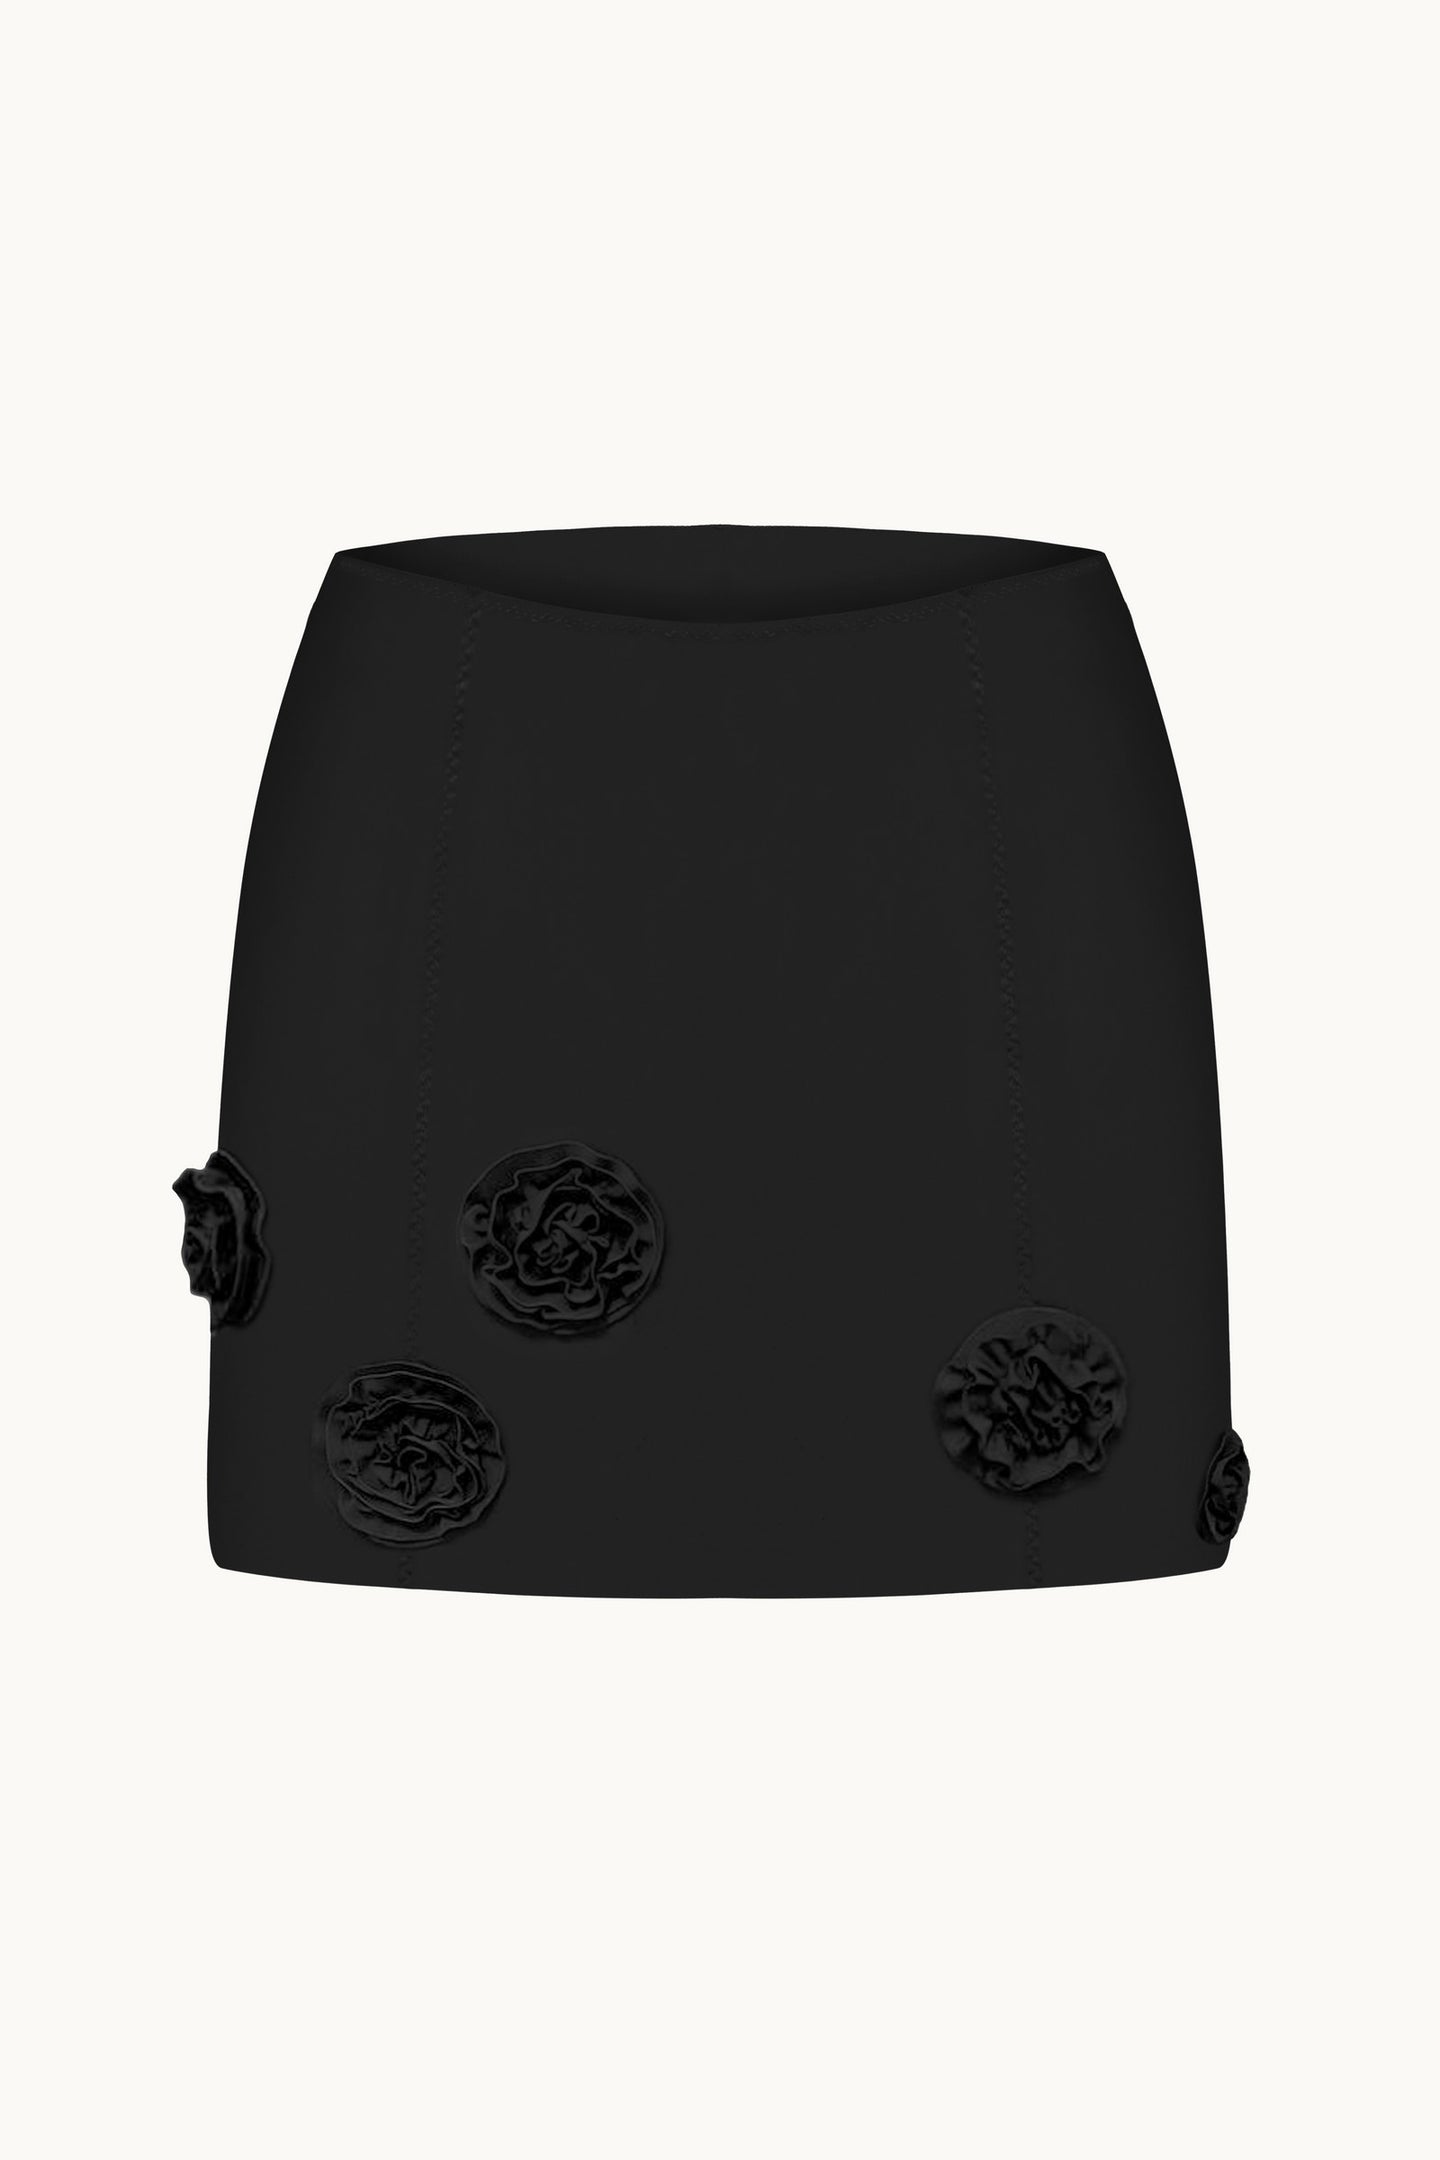 Rosy black skirt front view